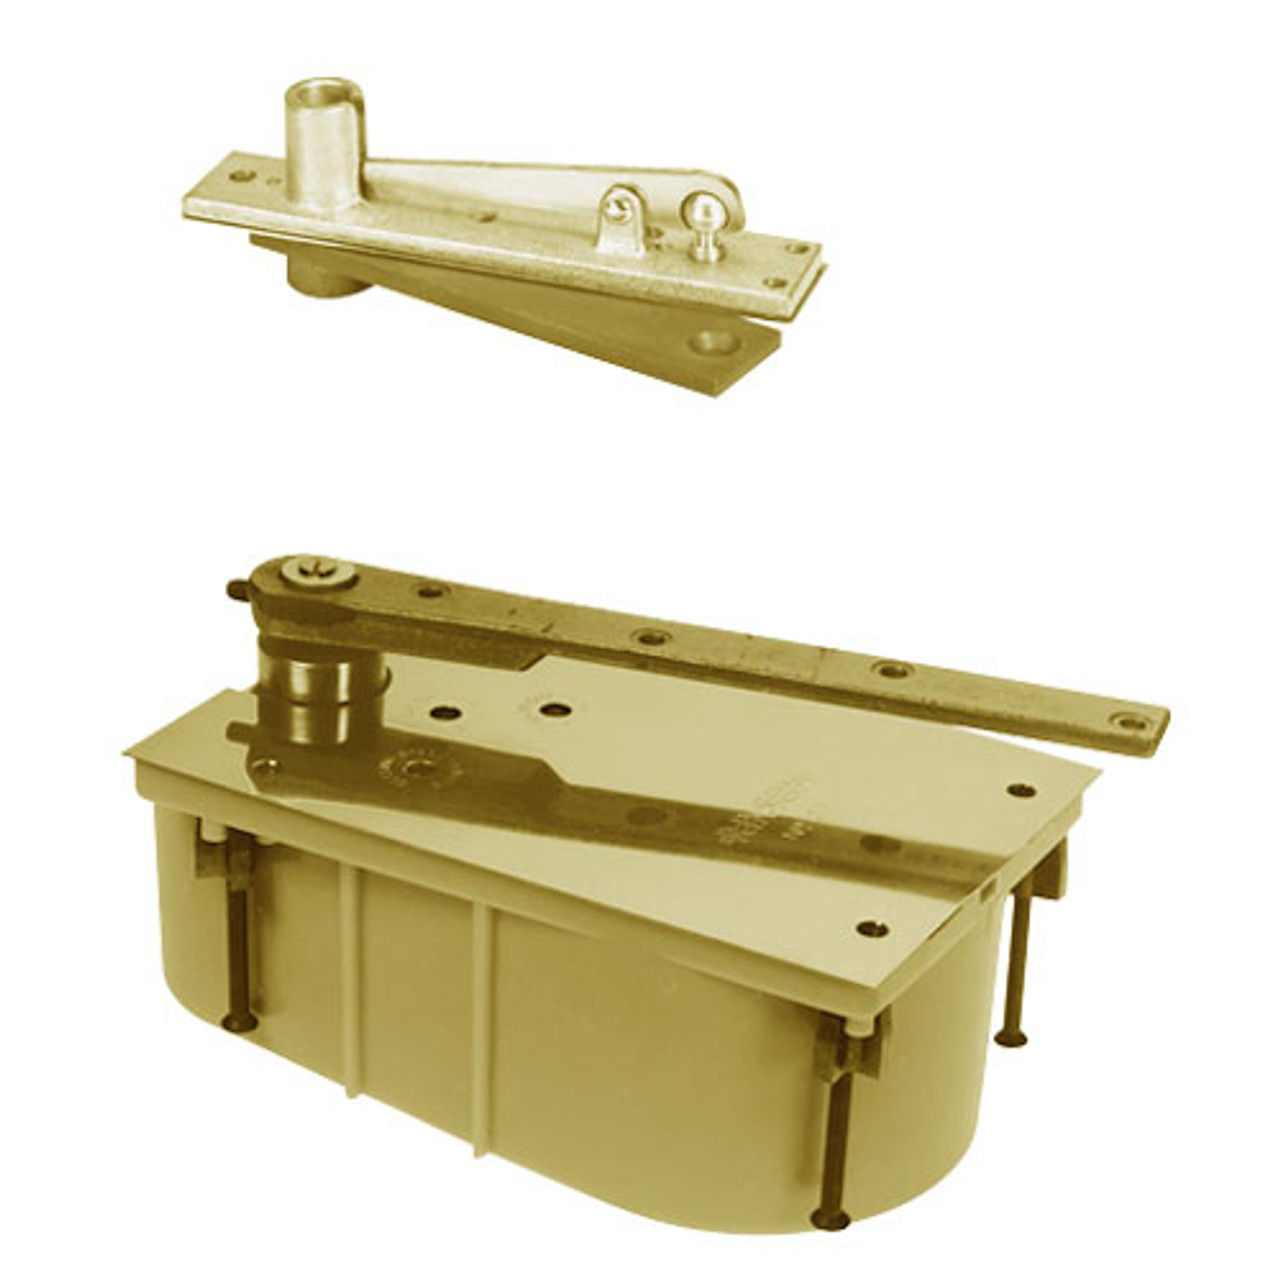 28-105N-554-CWF-RH-606 Rixson 28 Series Heavy Duty Single Acting Center Hung Floor Closer with Concealed Arm in Satin Brass Finish